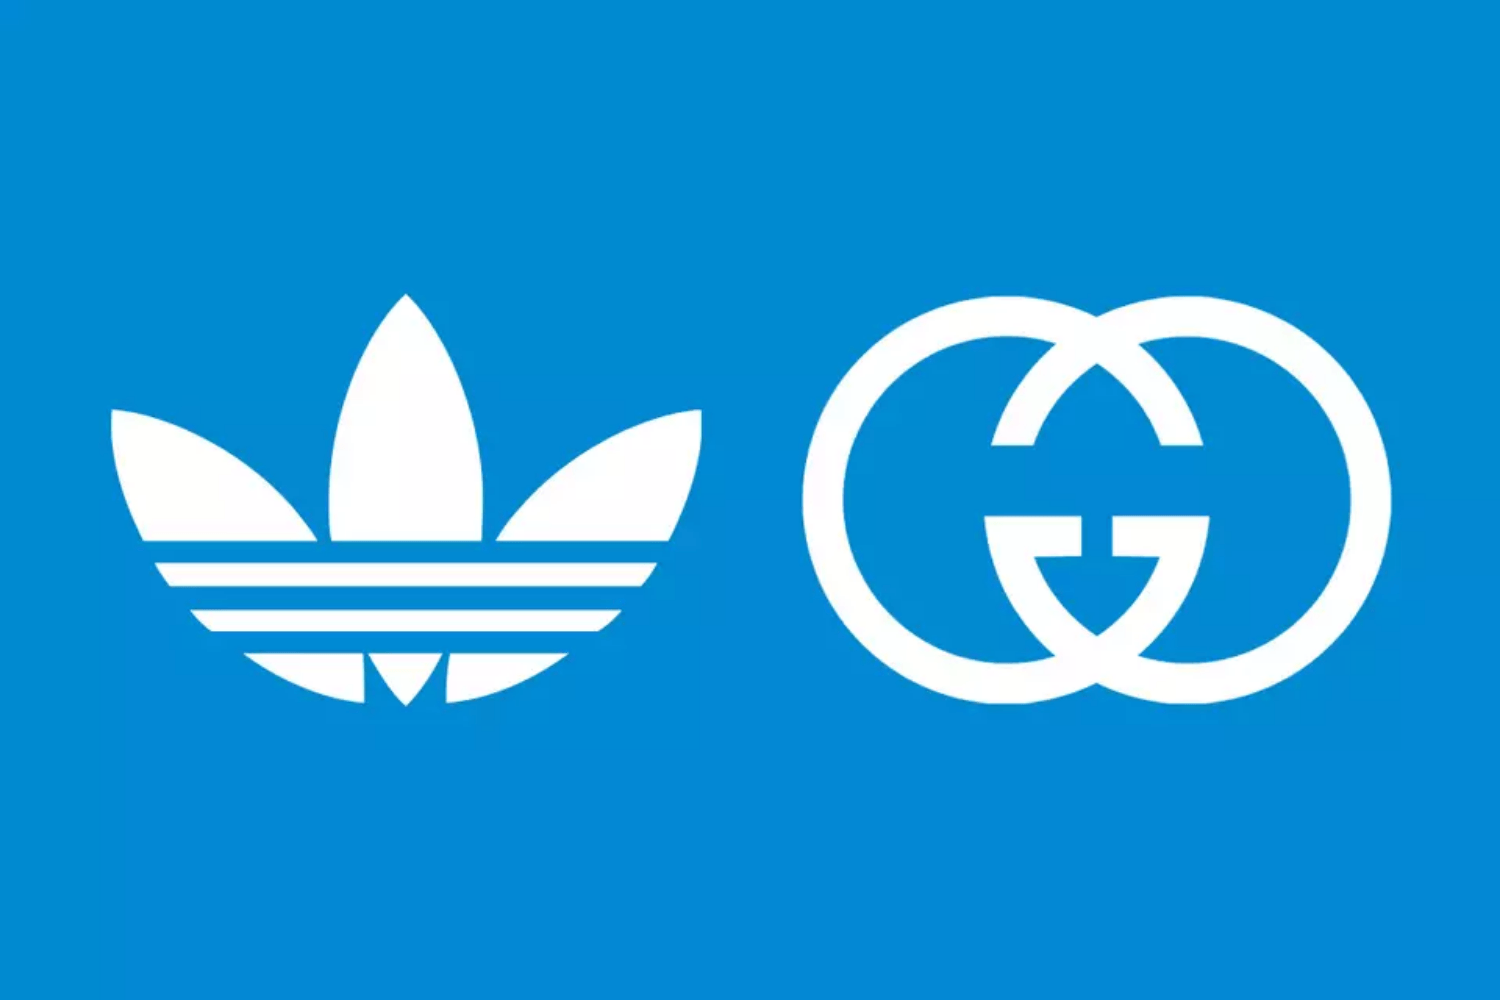 First images of Gucci x adidas collab